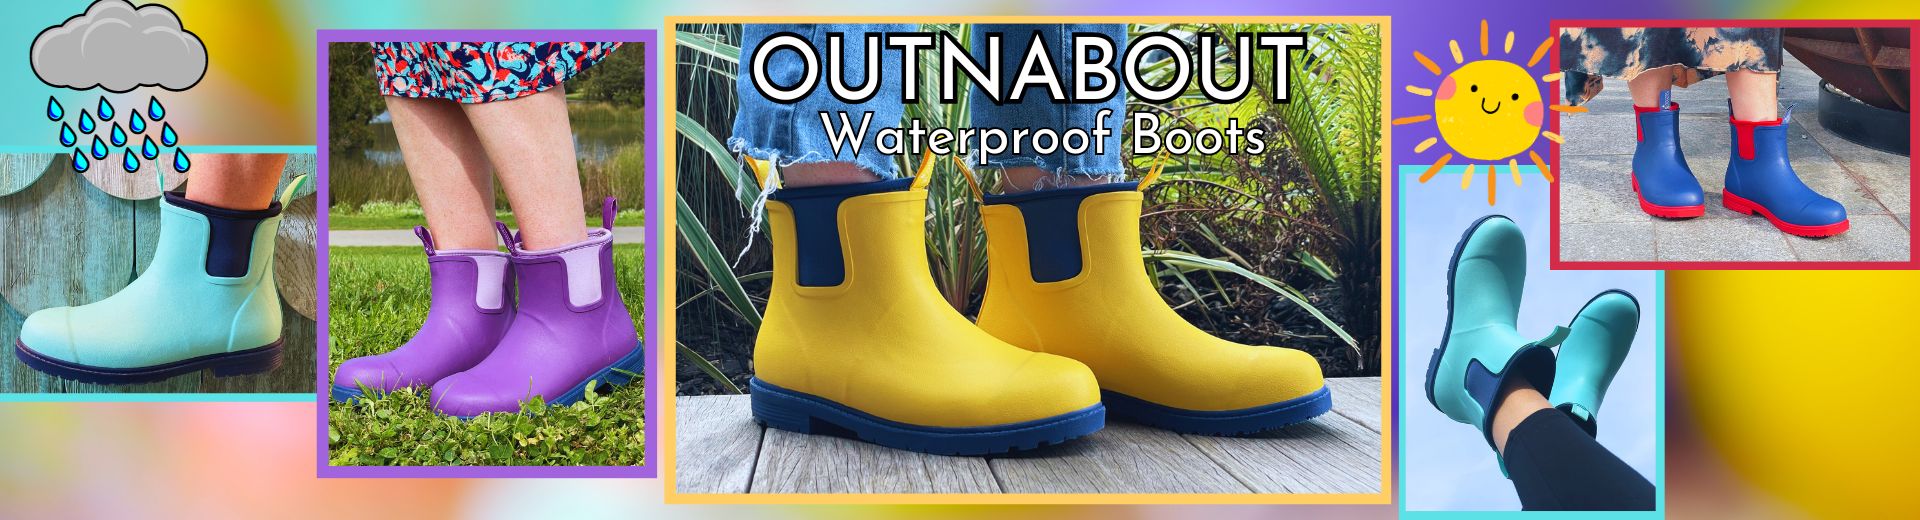 women's outnabout boots